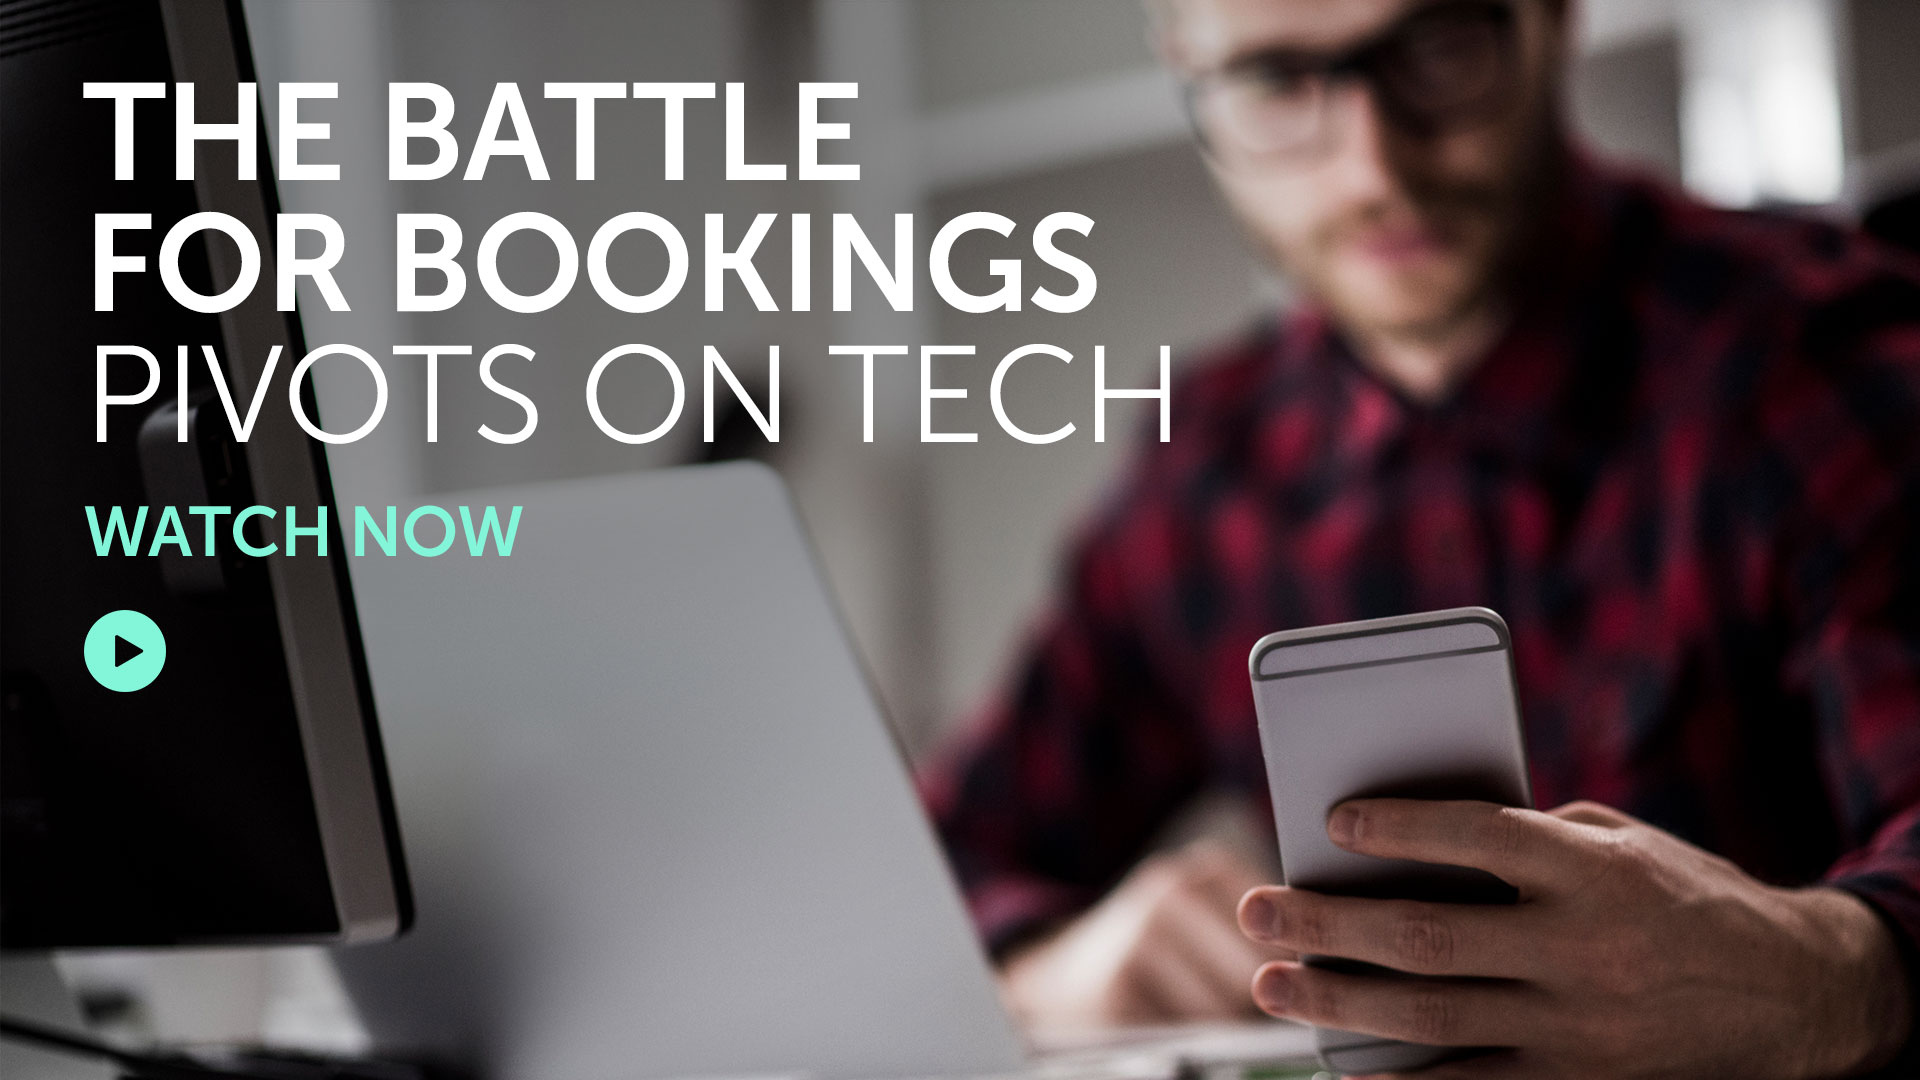 Briefing: The battle for bookings pivots on tech